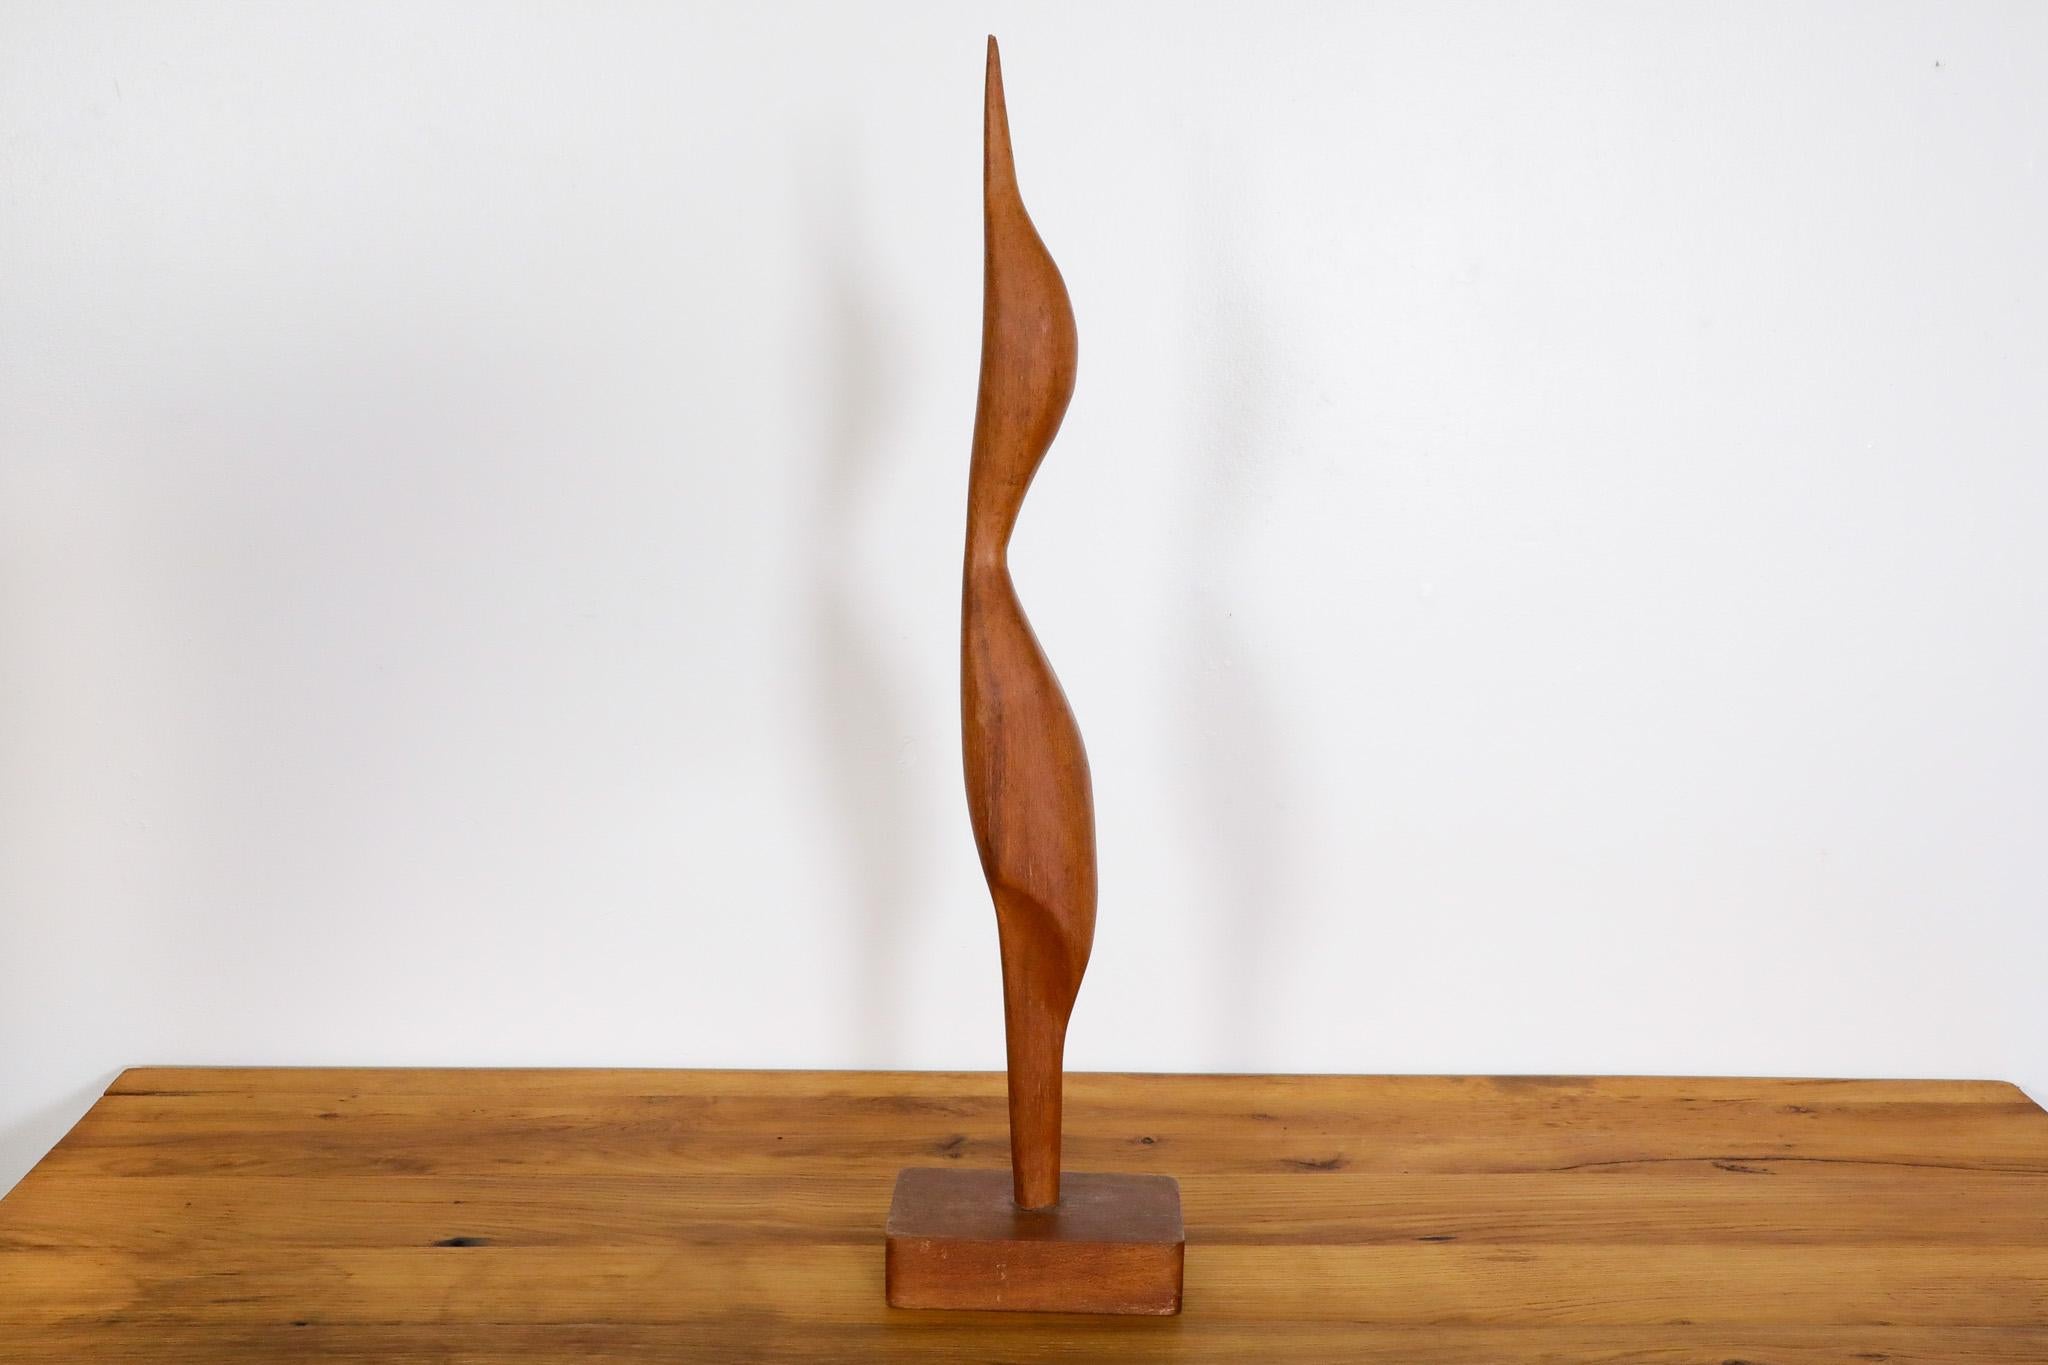 Mid-Century, Jacob Hermann style, tall Danish teak stork sculpture. Very handsomely carved, a beautiful table or shelf accessory. In impressive original condition with some light age appropriate wear consistent with its age. 